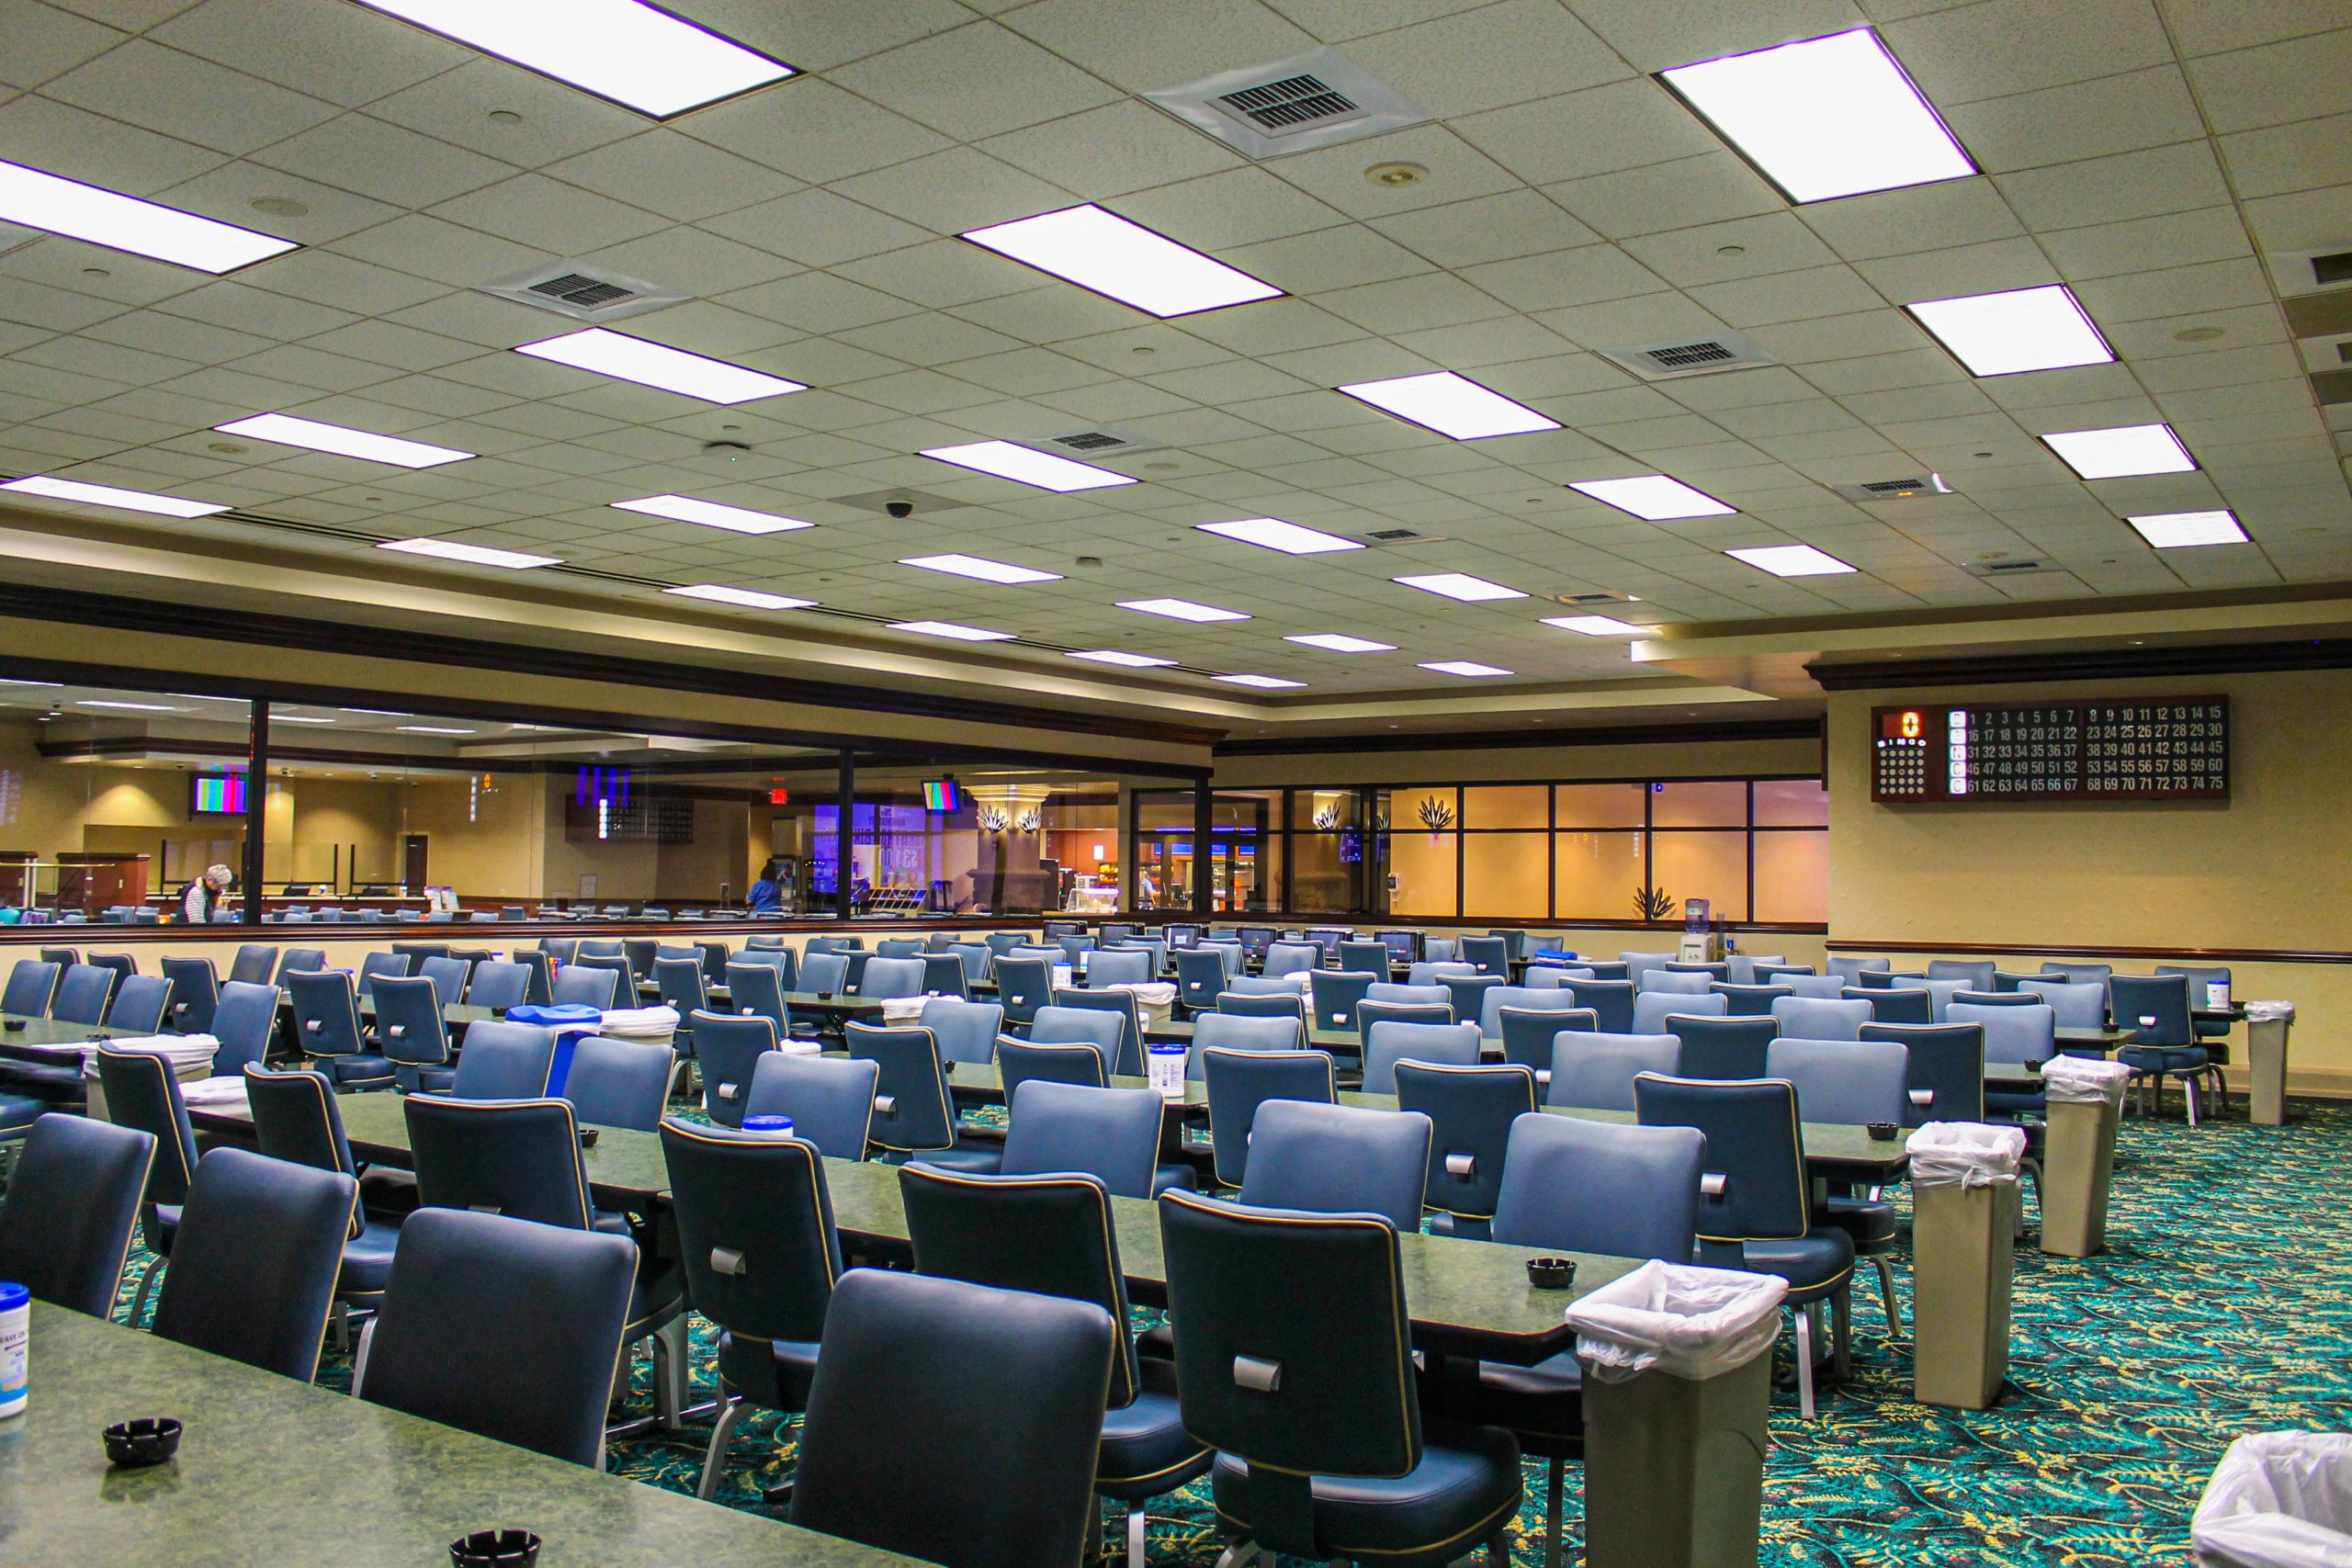 Seven Feathers Casino Resort is your place to play bingo in Oregon